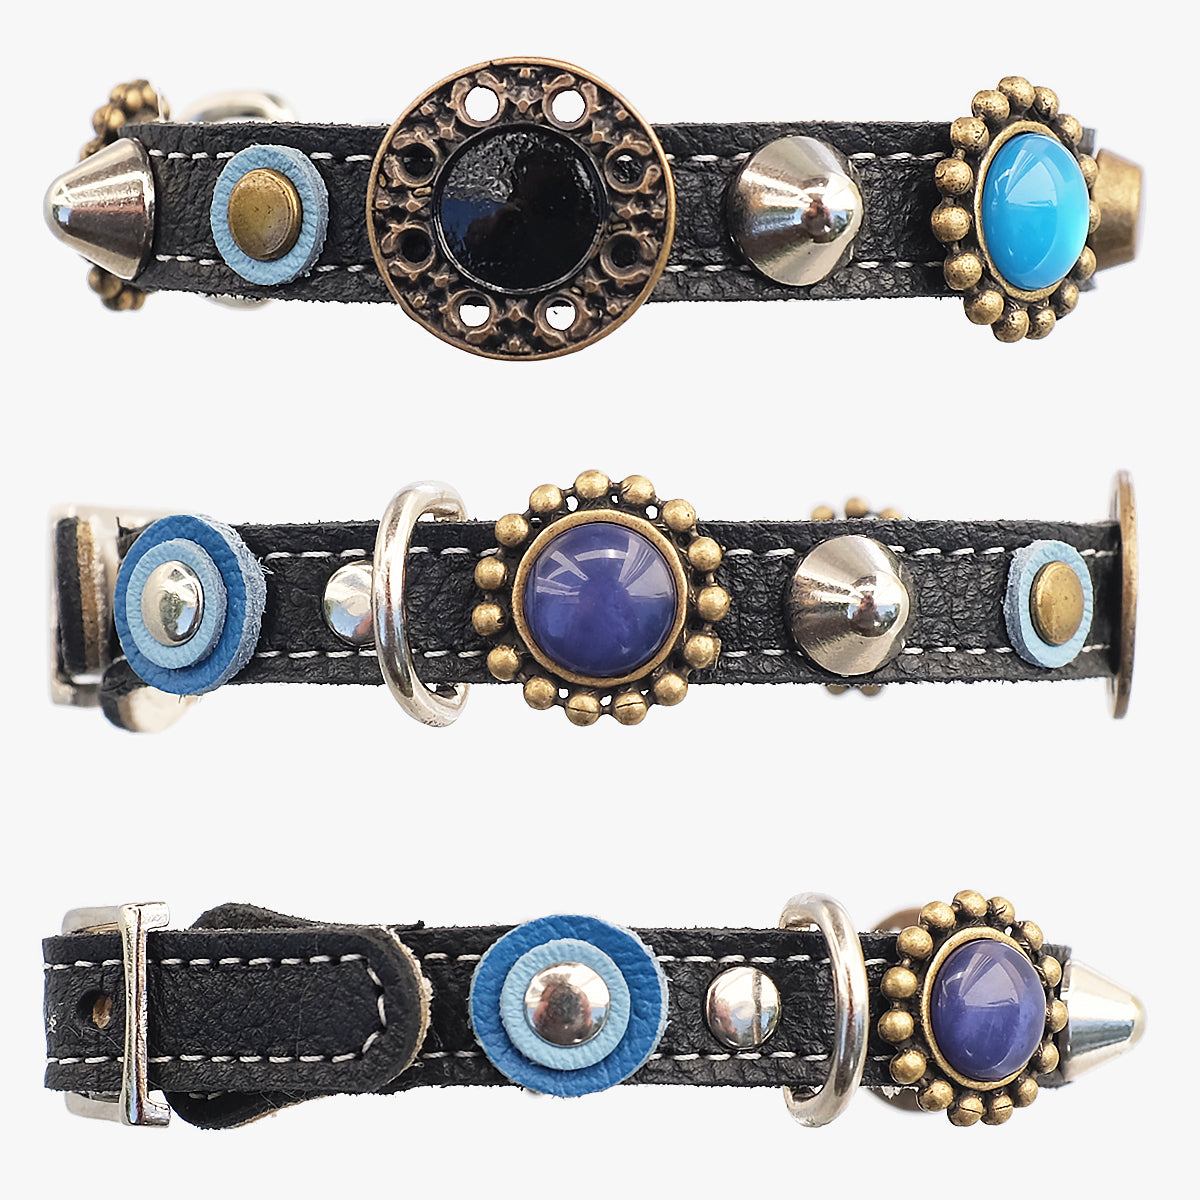 Superpipapo Luxury Leather Cat Collar, In Black With Studs, Spikes & Blue Stones | at Made Moggie